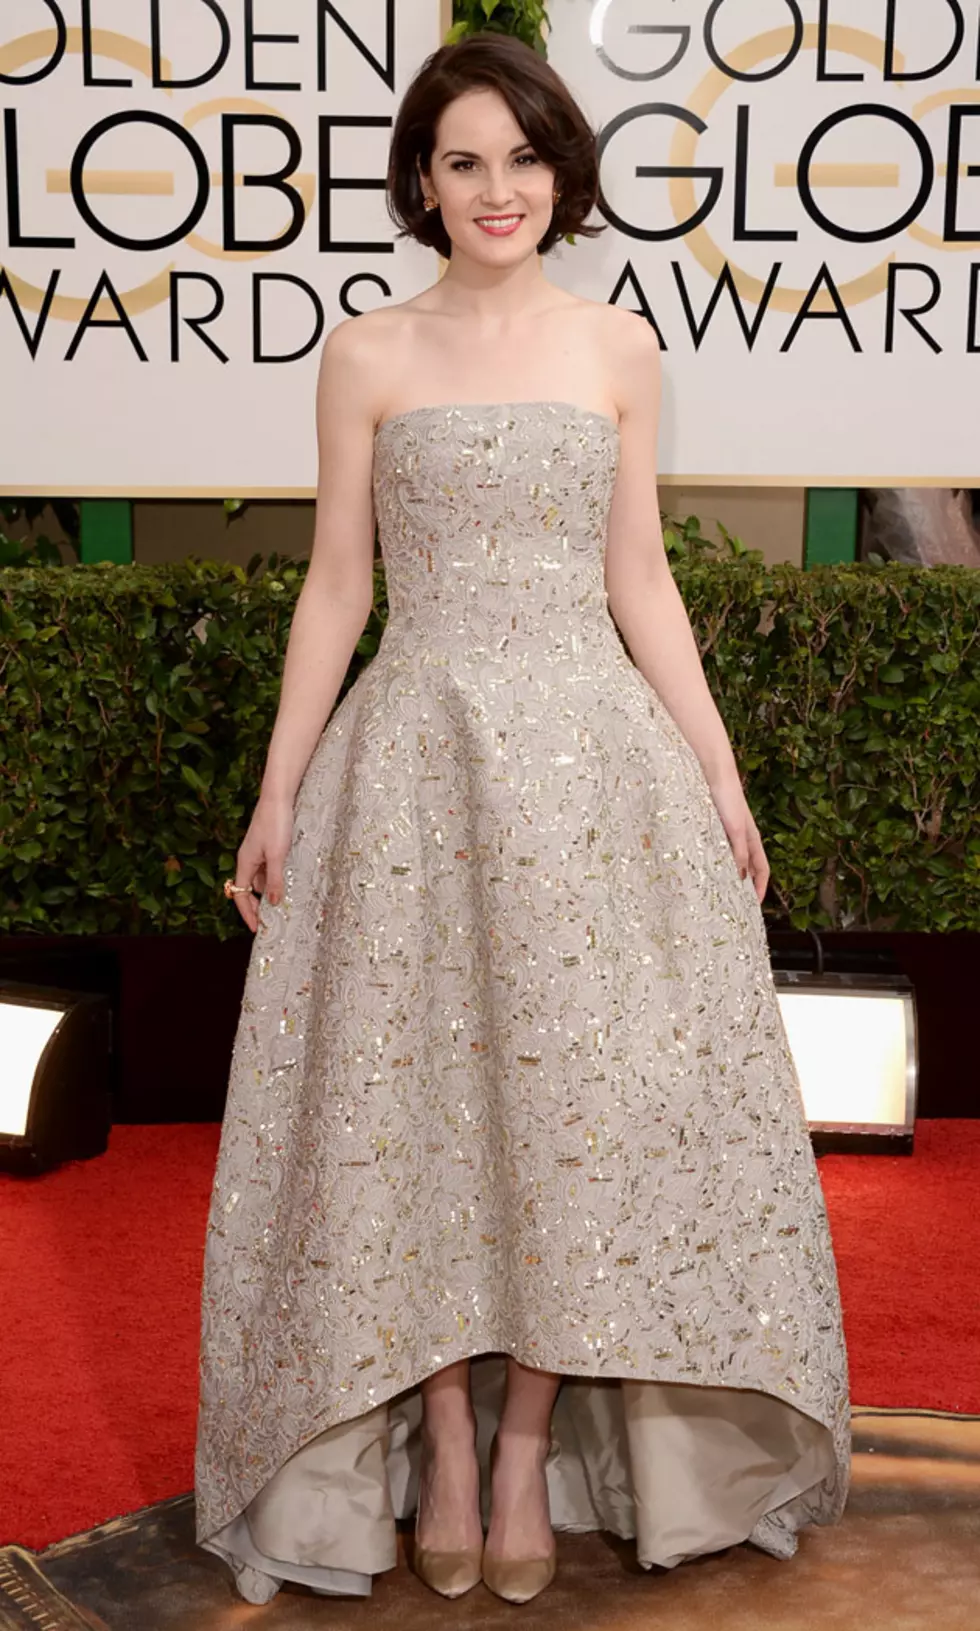 Michelle Dockery Sparkles in Her Dress on the 2014 Golden Globes Red Carpet [PHOTOS]